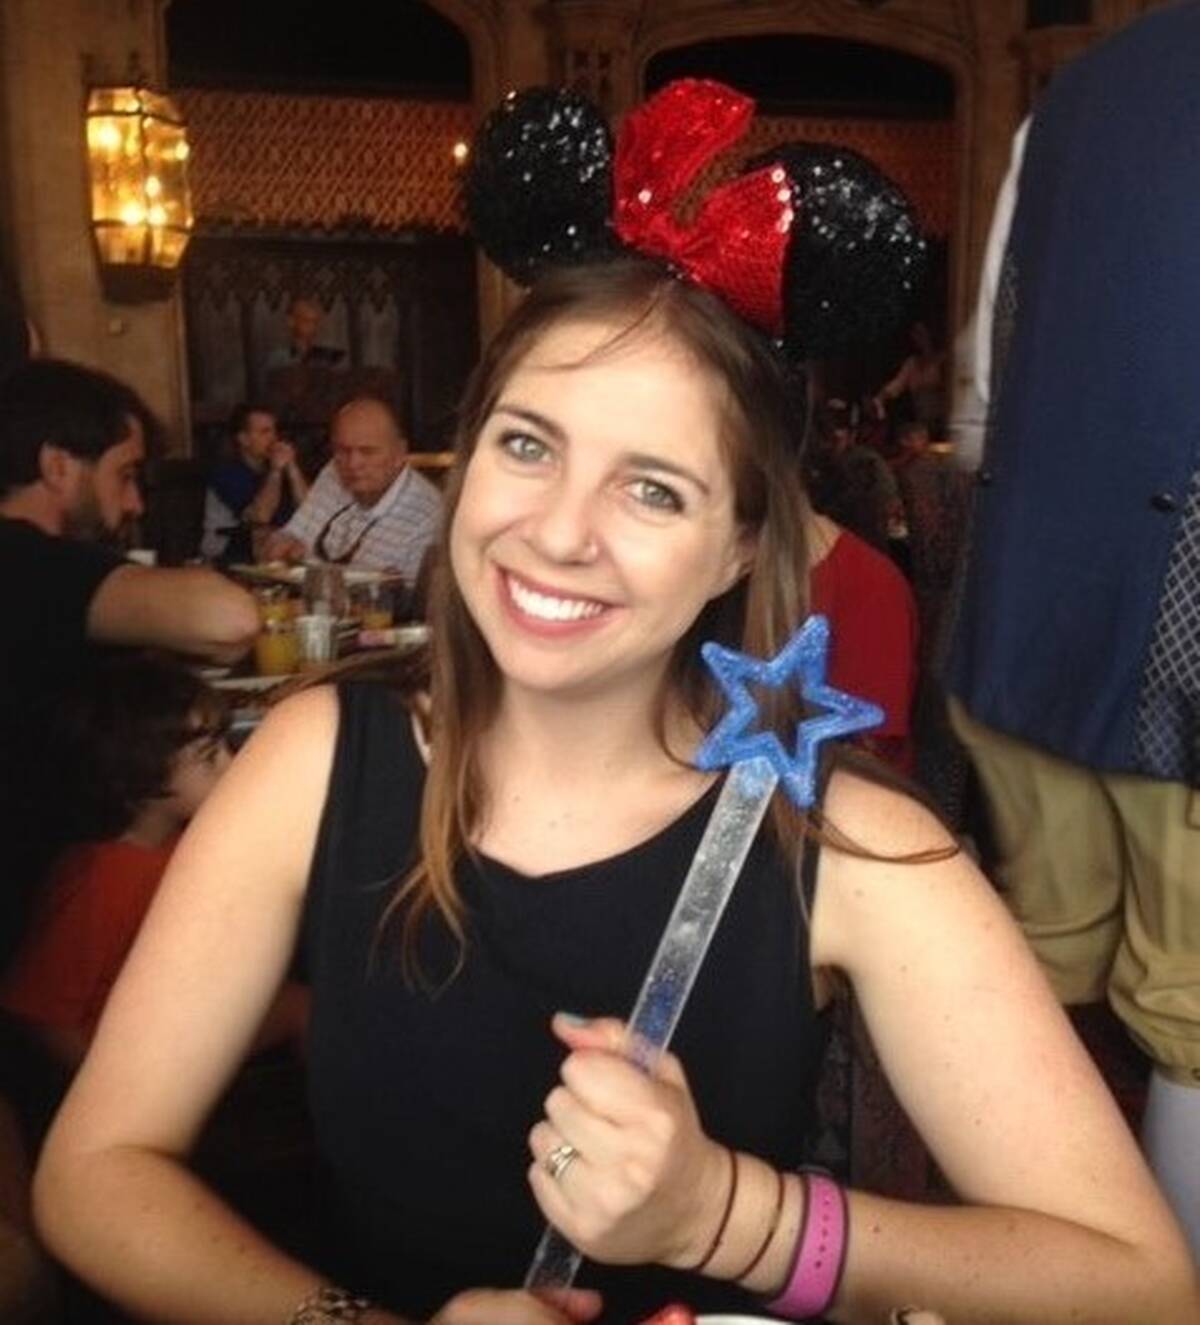 Smiling woman with Mickey ears and a wand